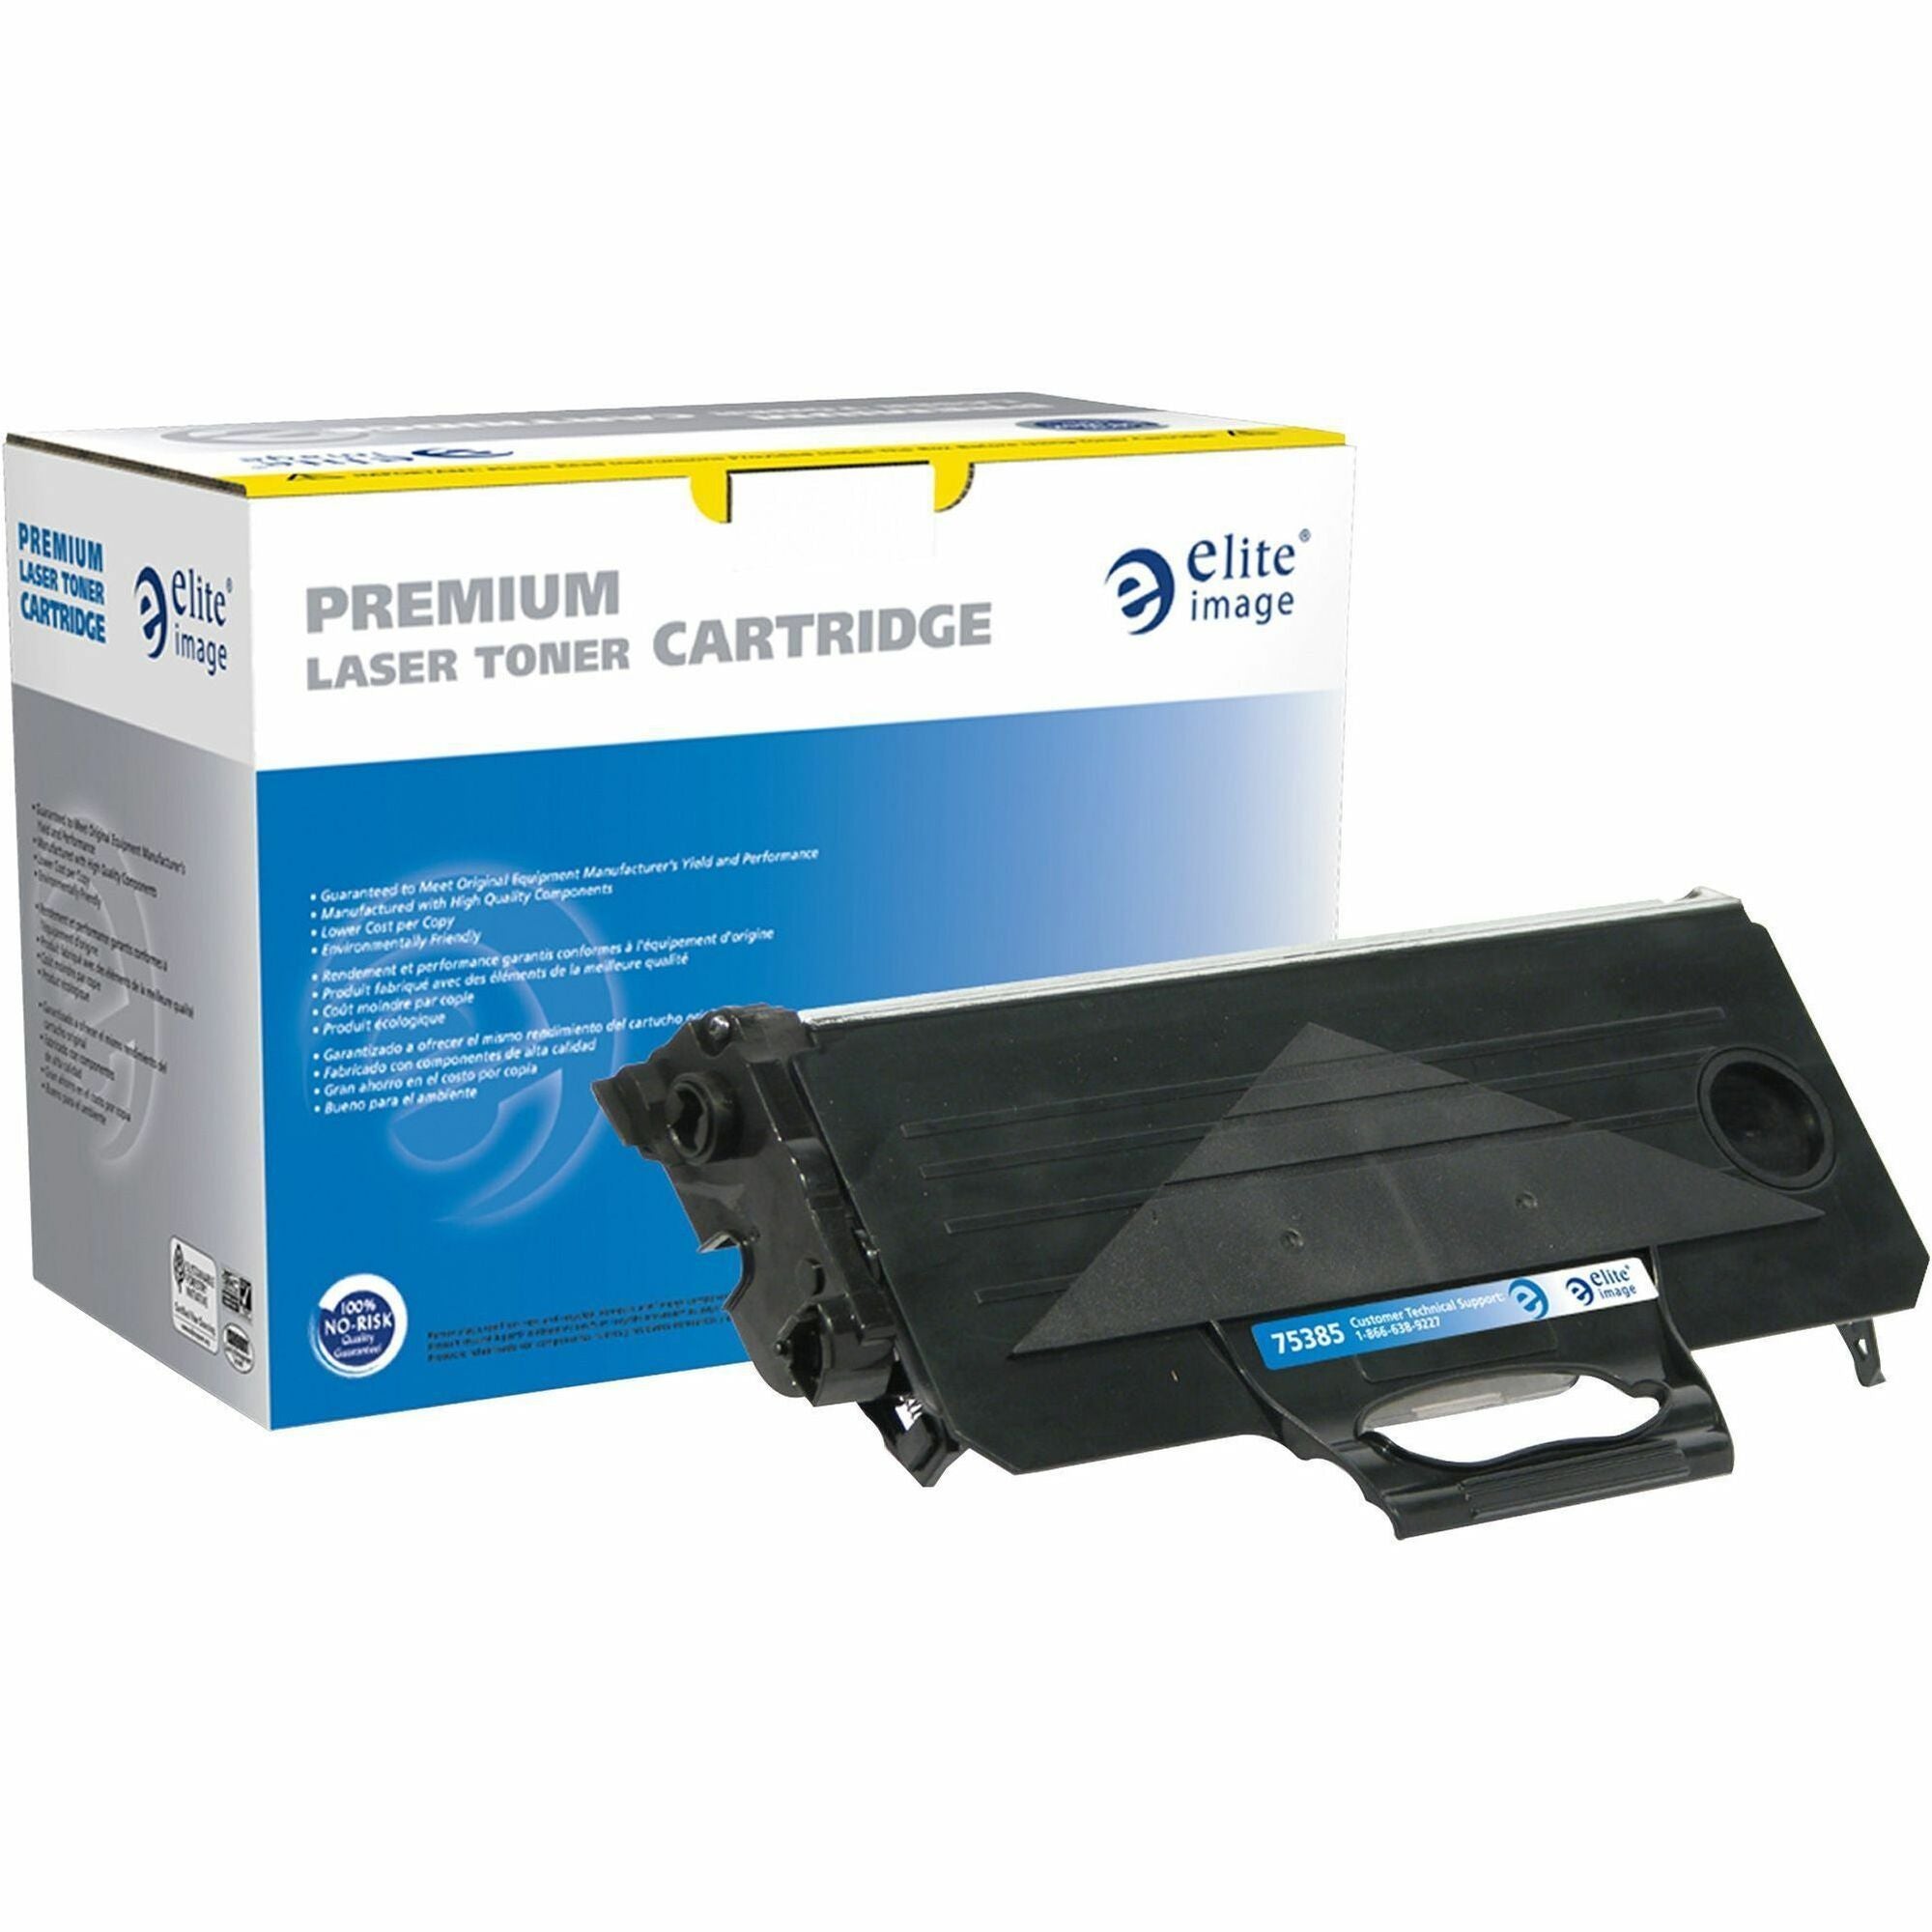 Elite Image Remanufactured High Yield Laser Toner Cartridge - Alternative for Brother TN360 - Black - 1 Each - 2600 Pages - 